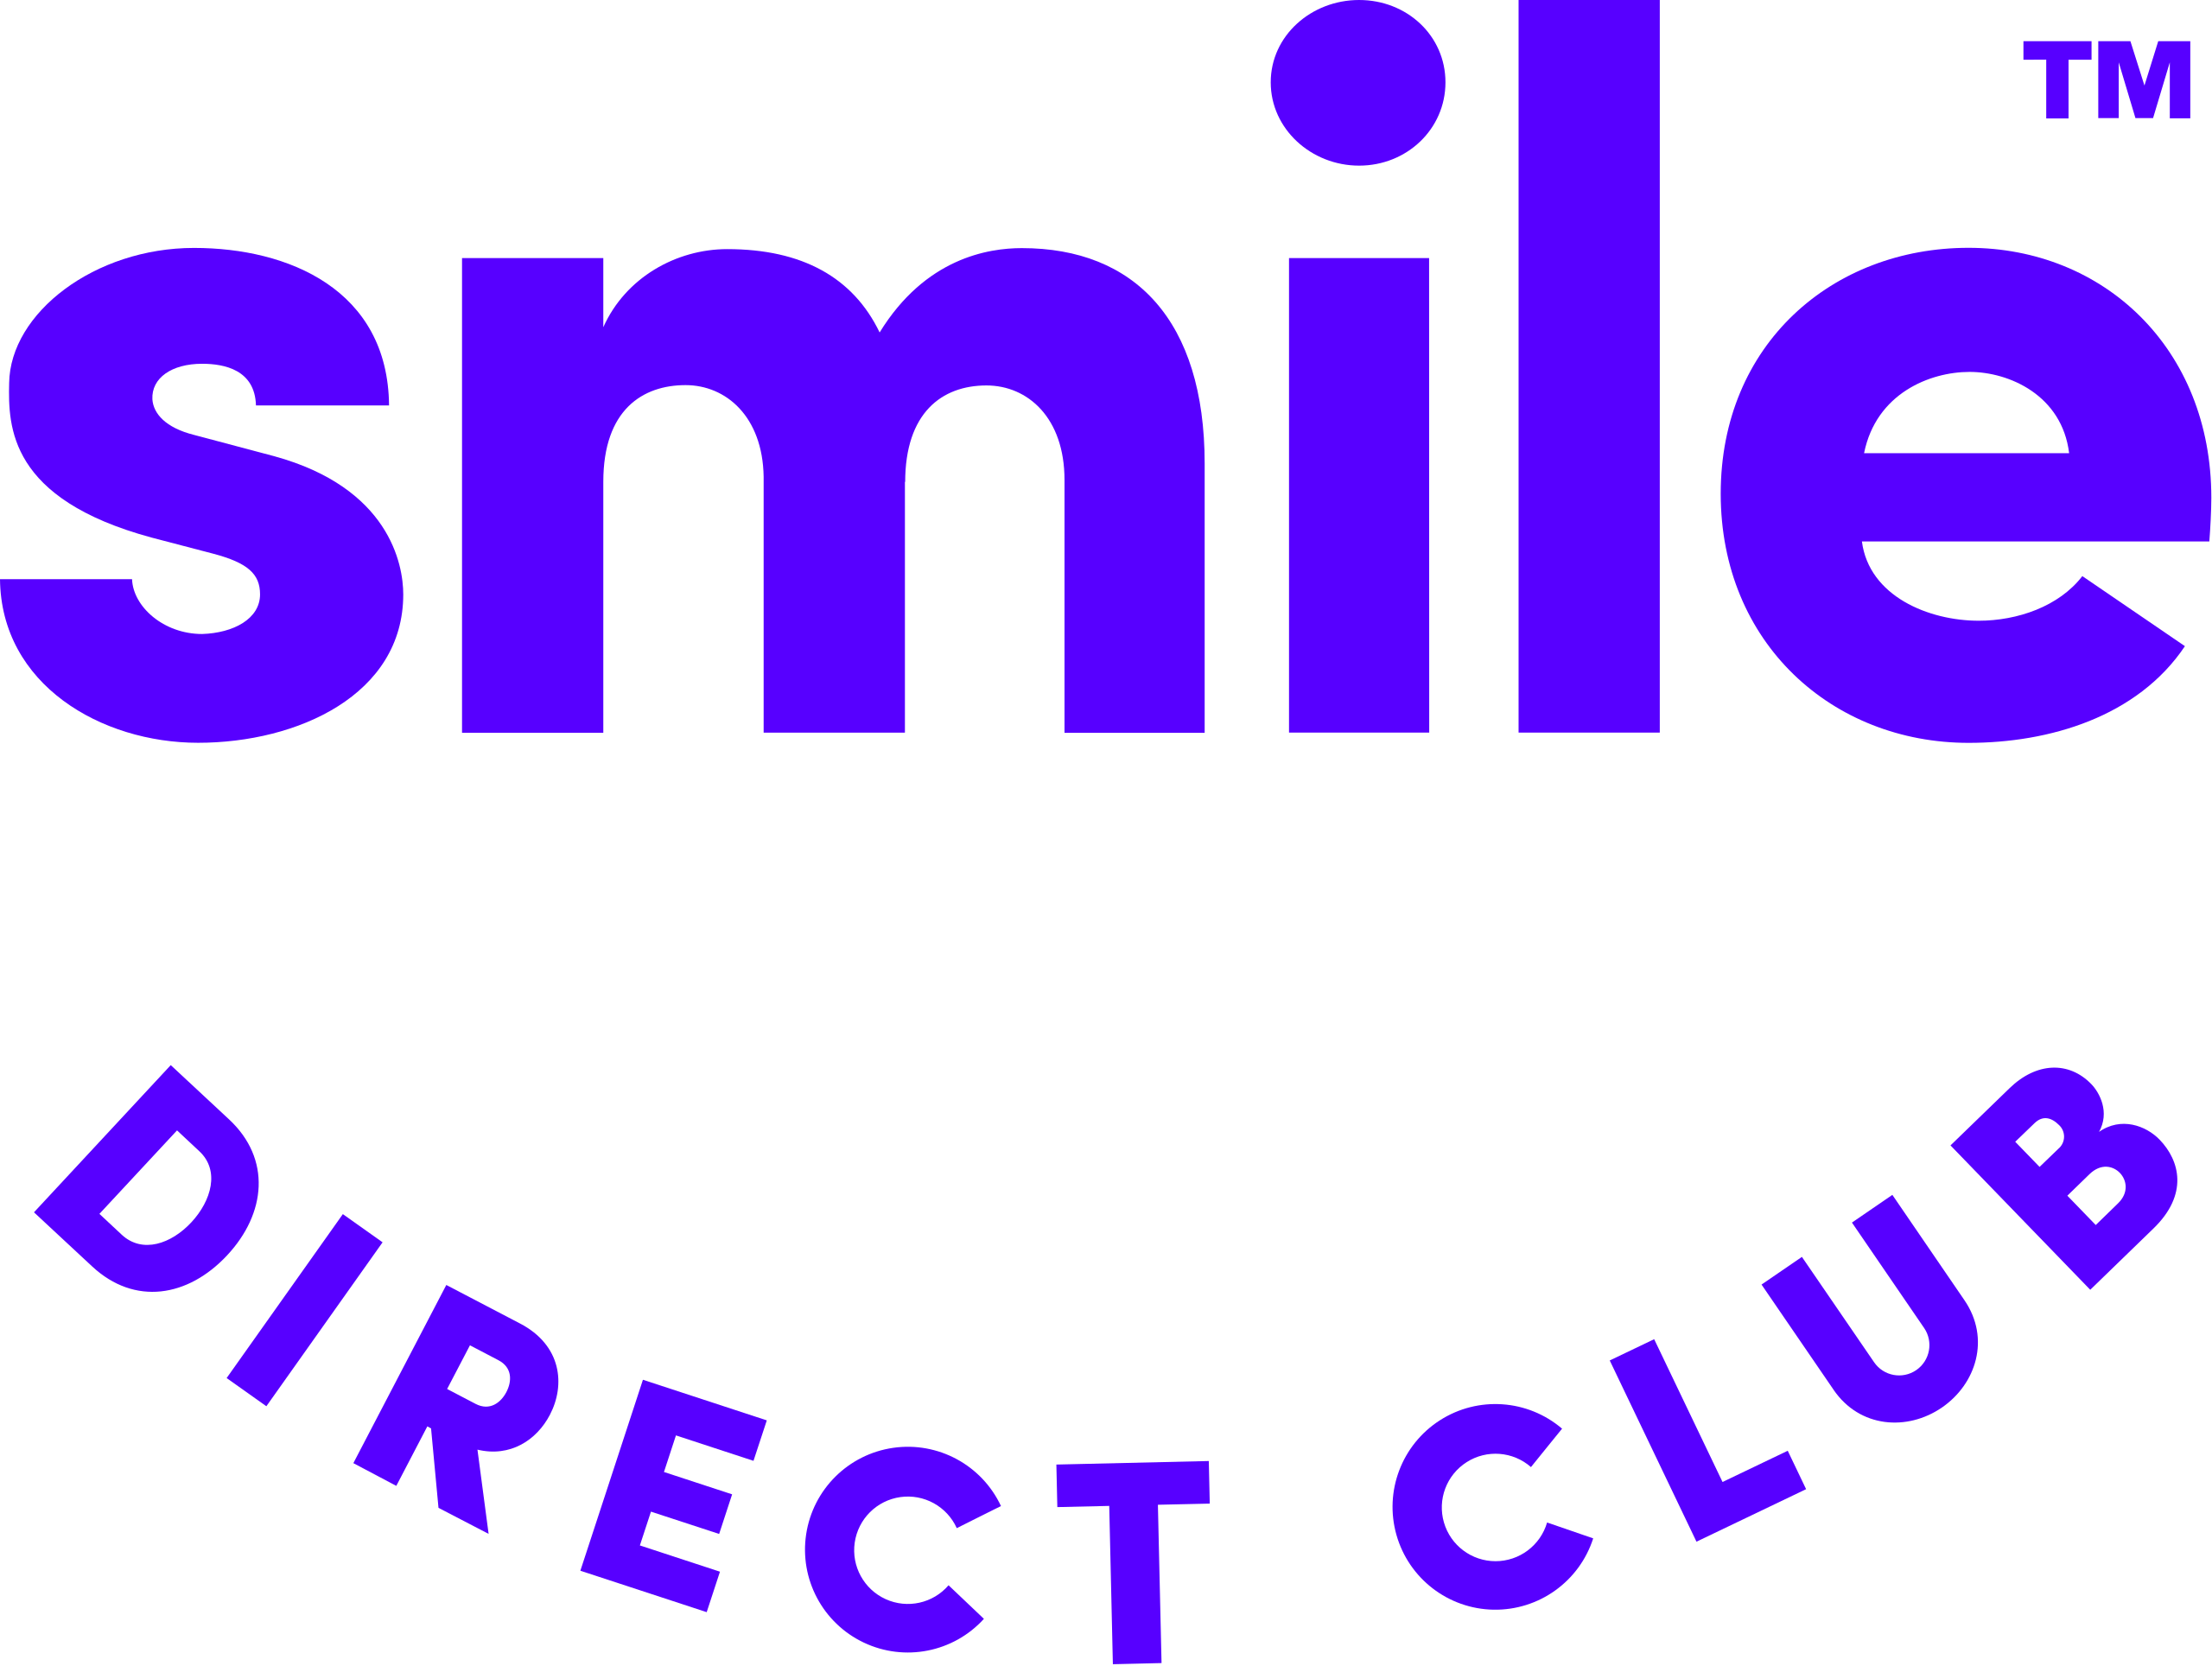 Smile Direct Club Coupons